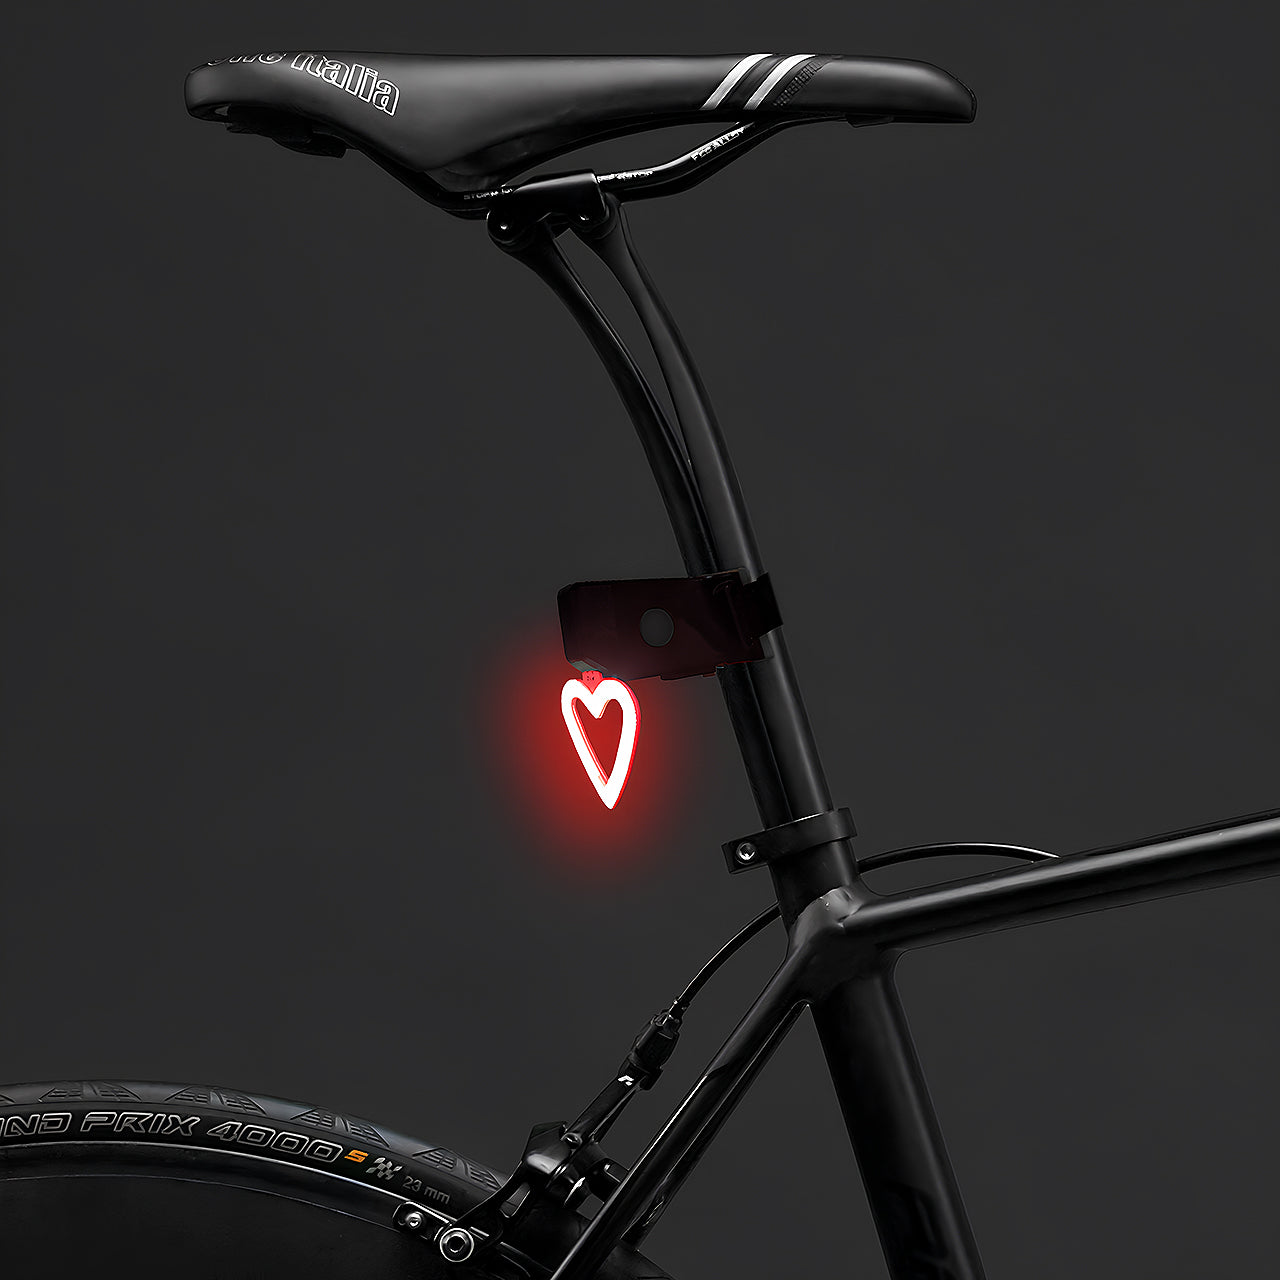 Cyclamore LED Bike Tail Light - A Heart-Shaped Light for Day & Night Safety